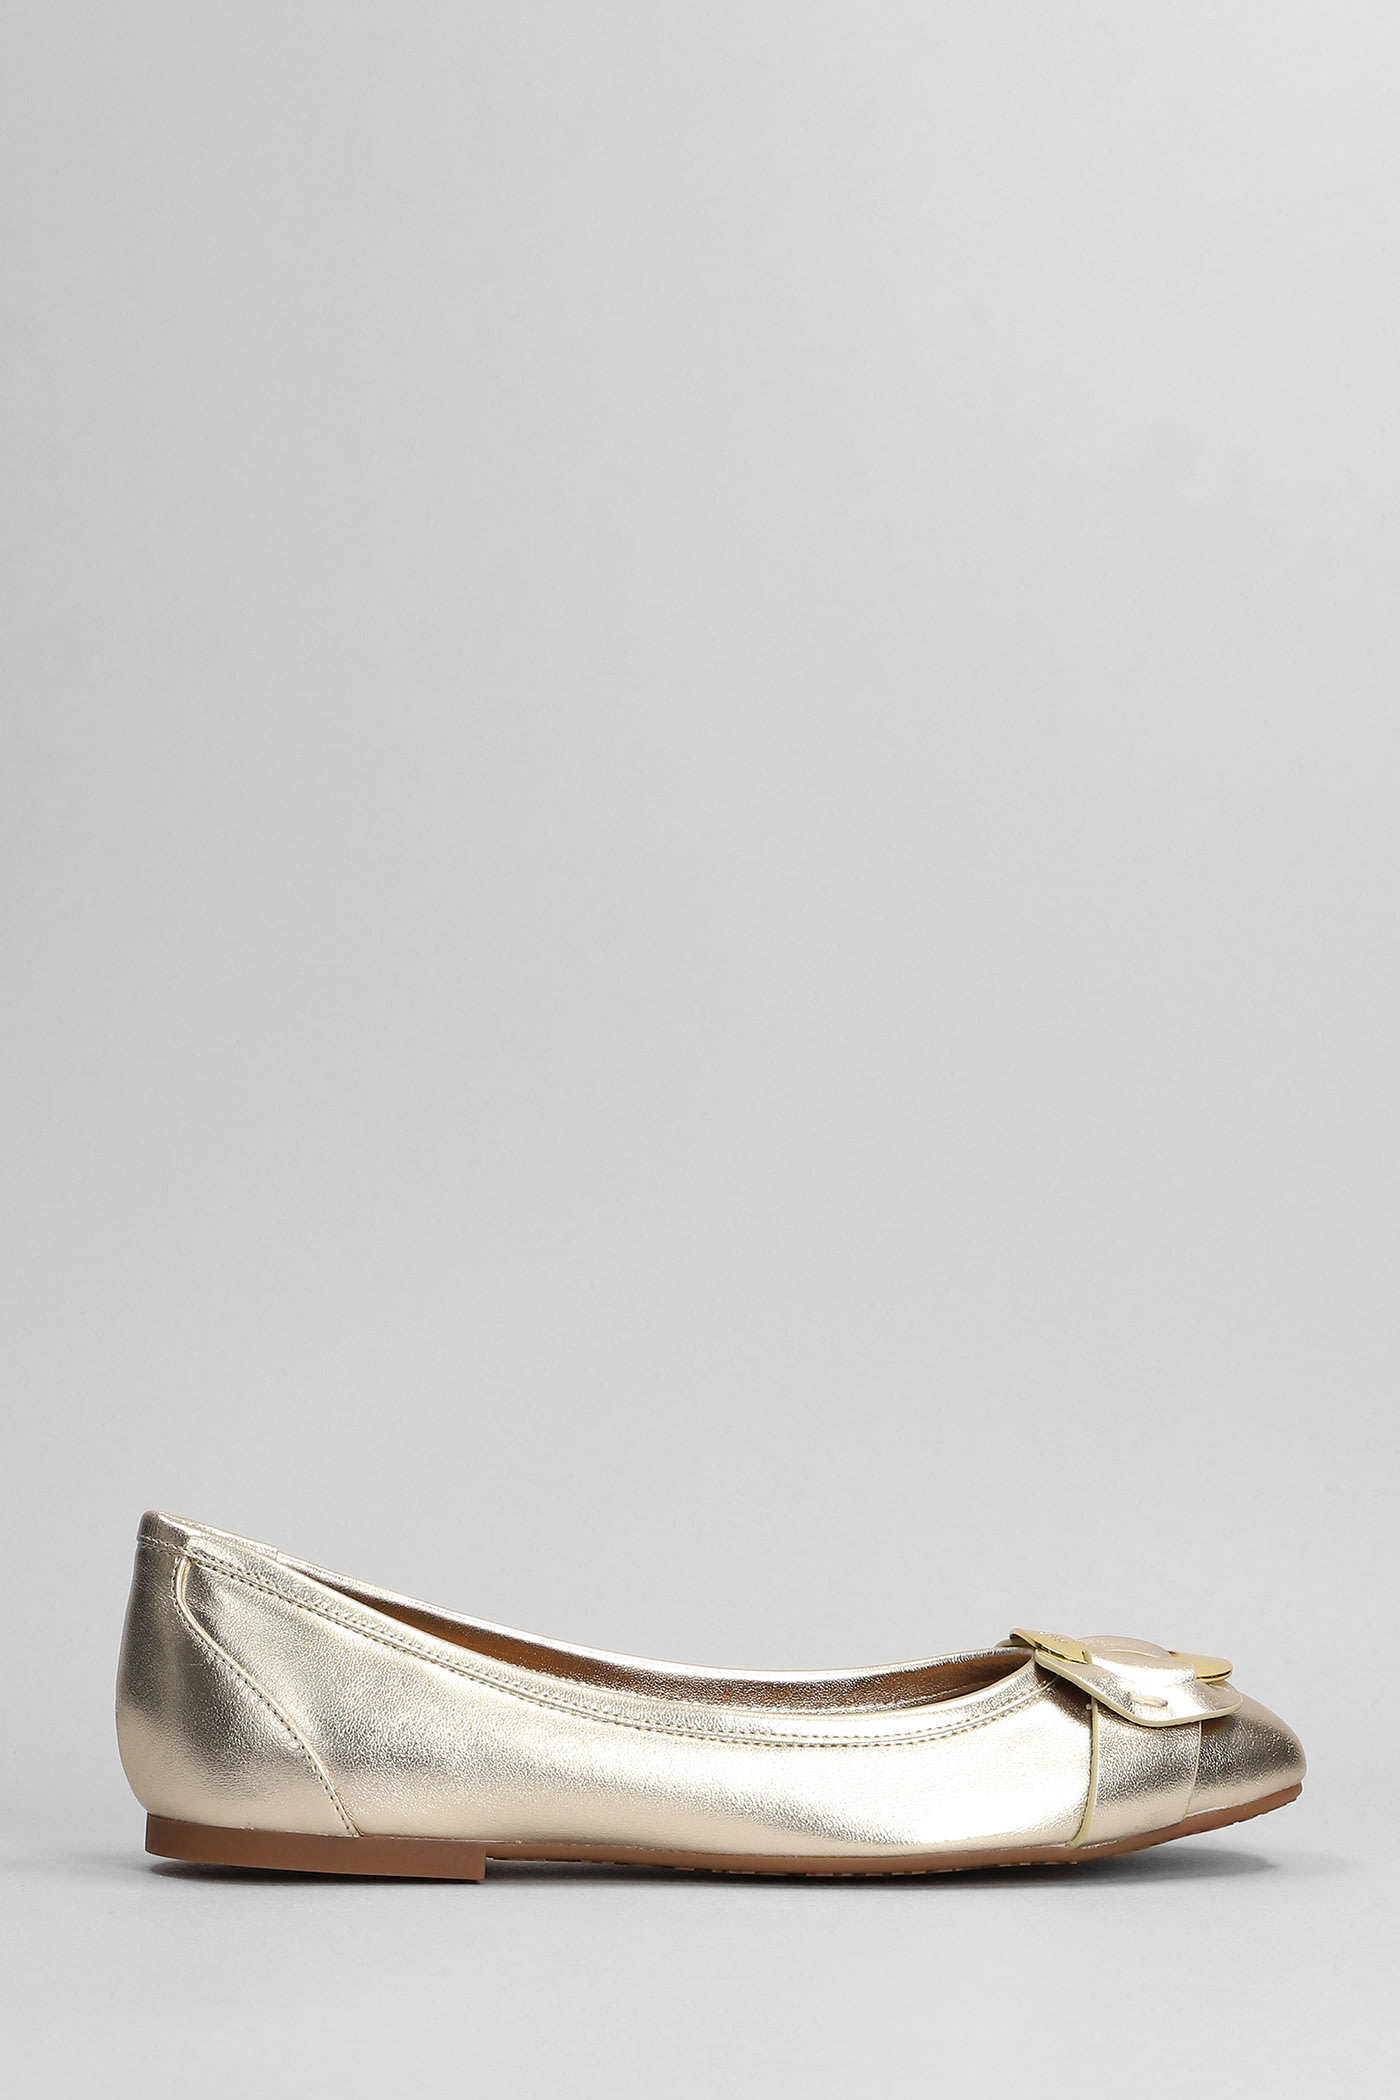 See by Chloé Chany Ballet Flats In Gold Leather